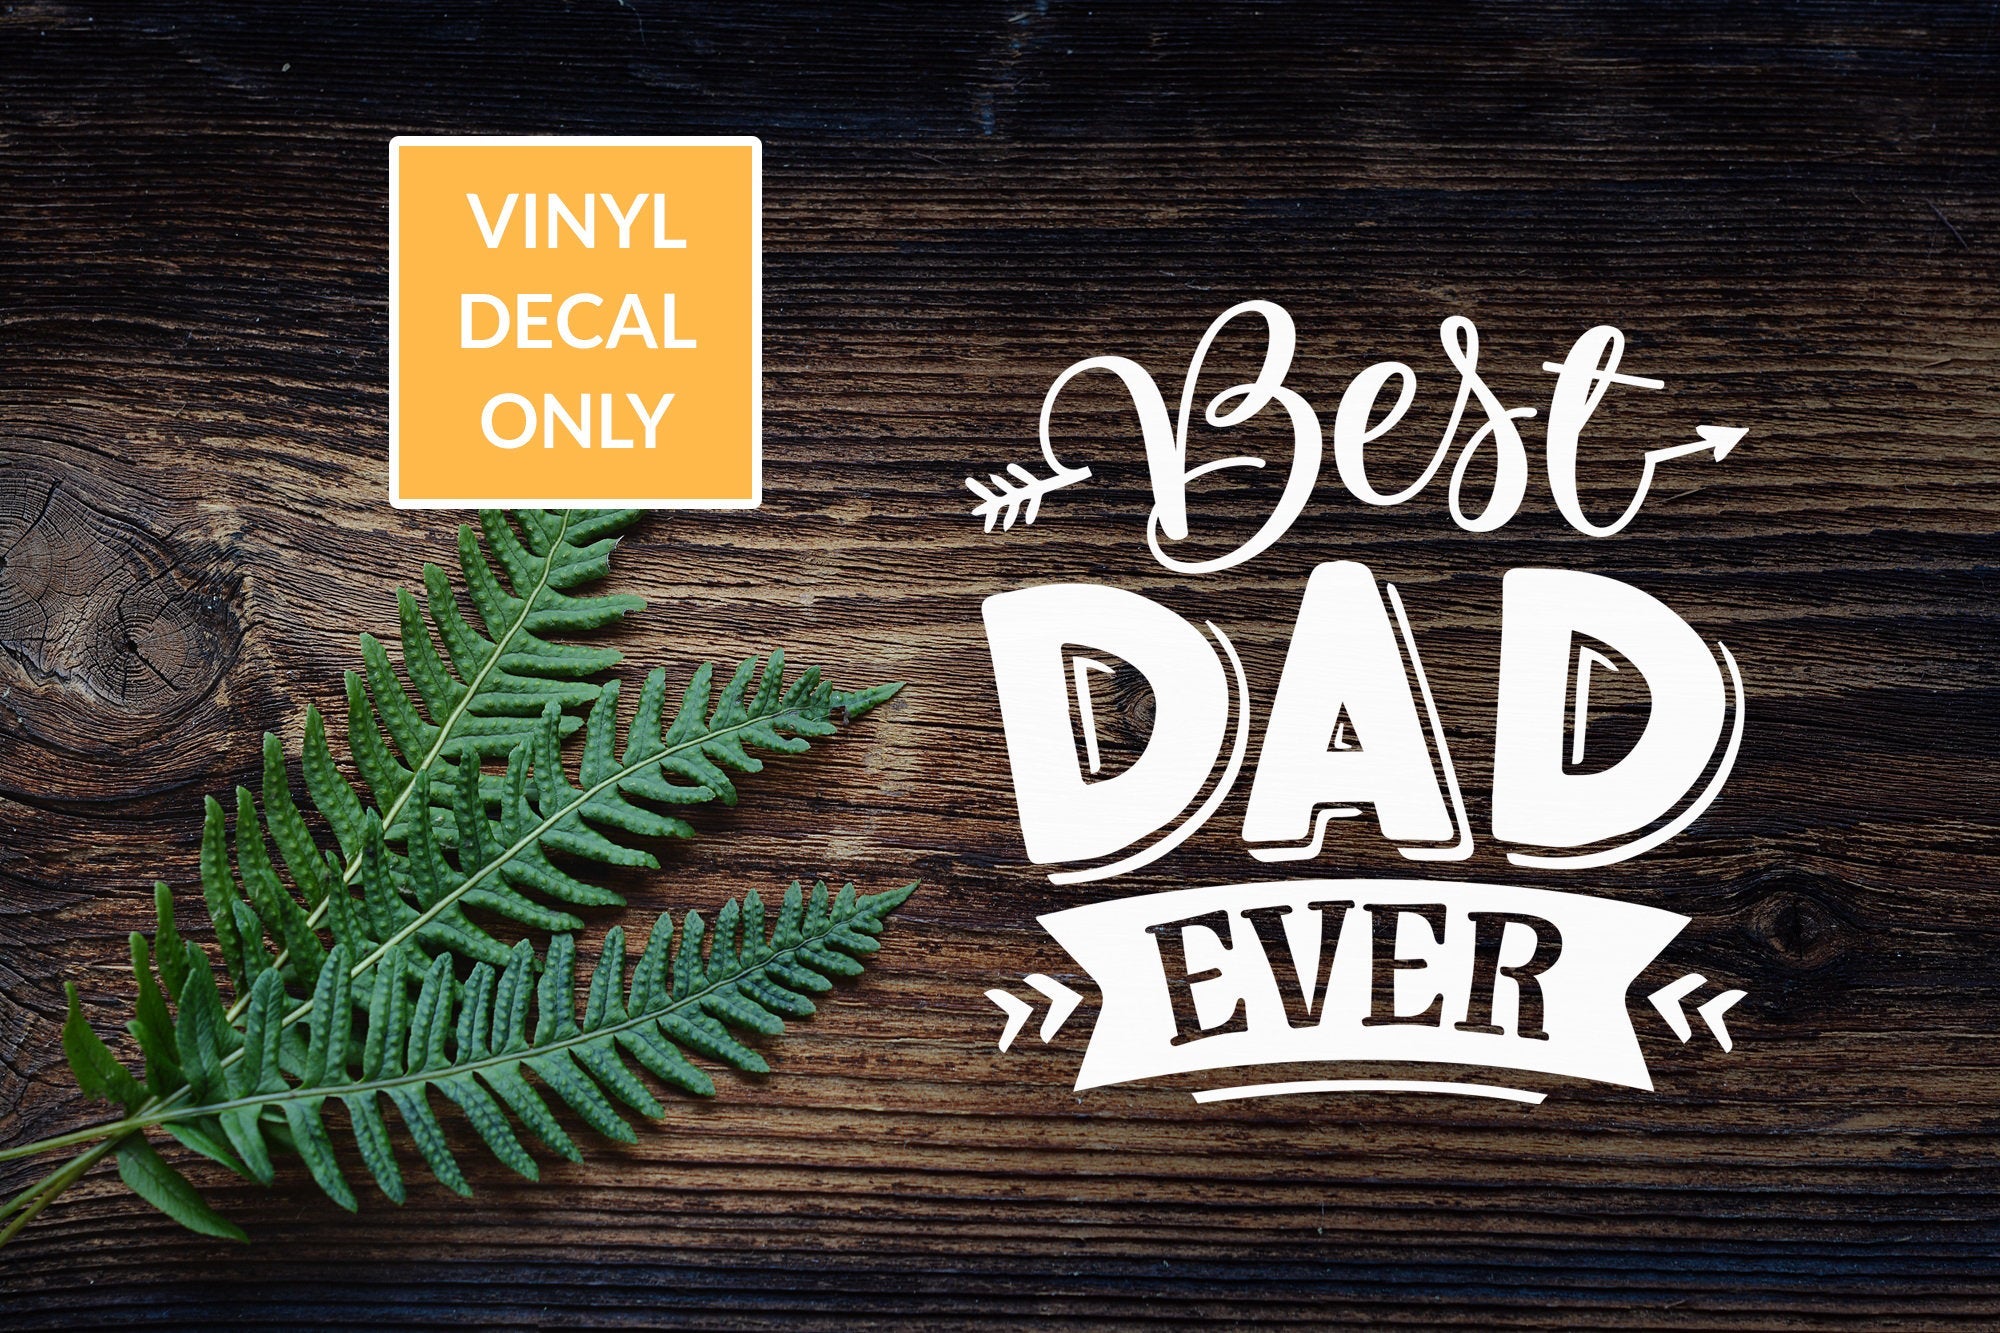 Best Dad Ever - Permanent Vinyl Decal for Signs, Acrylic, Glass, Metal, Wood, Decor, and other Smooth Surfaces